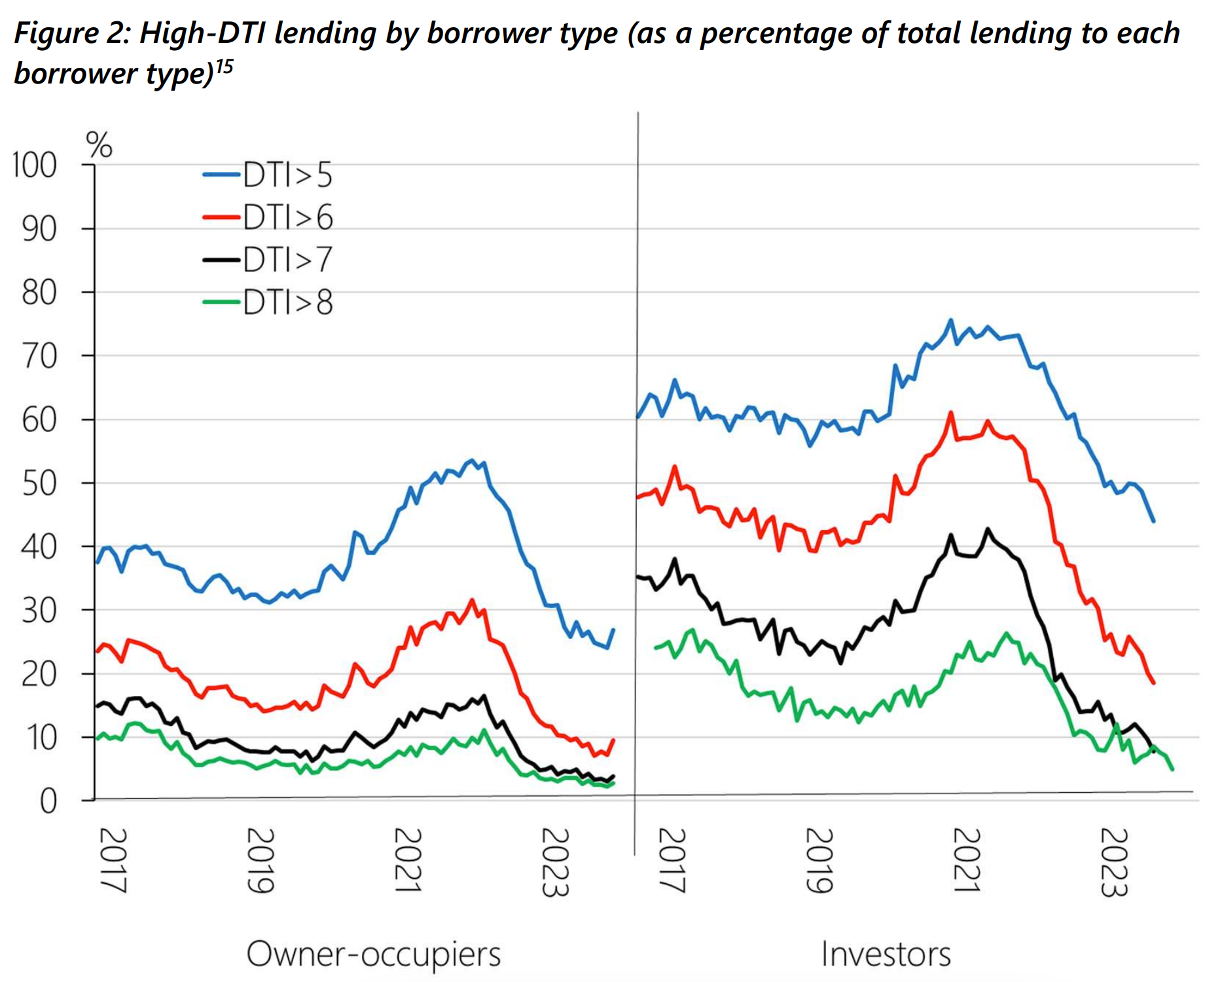 Reserve Bank of New Zealand's graph tracking levels of "high-DTI" lending, across different DTI levels, since 2017 - for both owner-occupiers and property investors